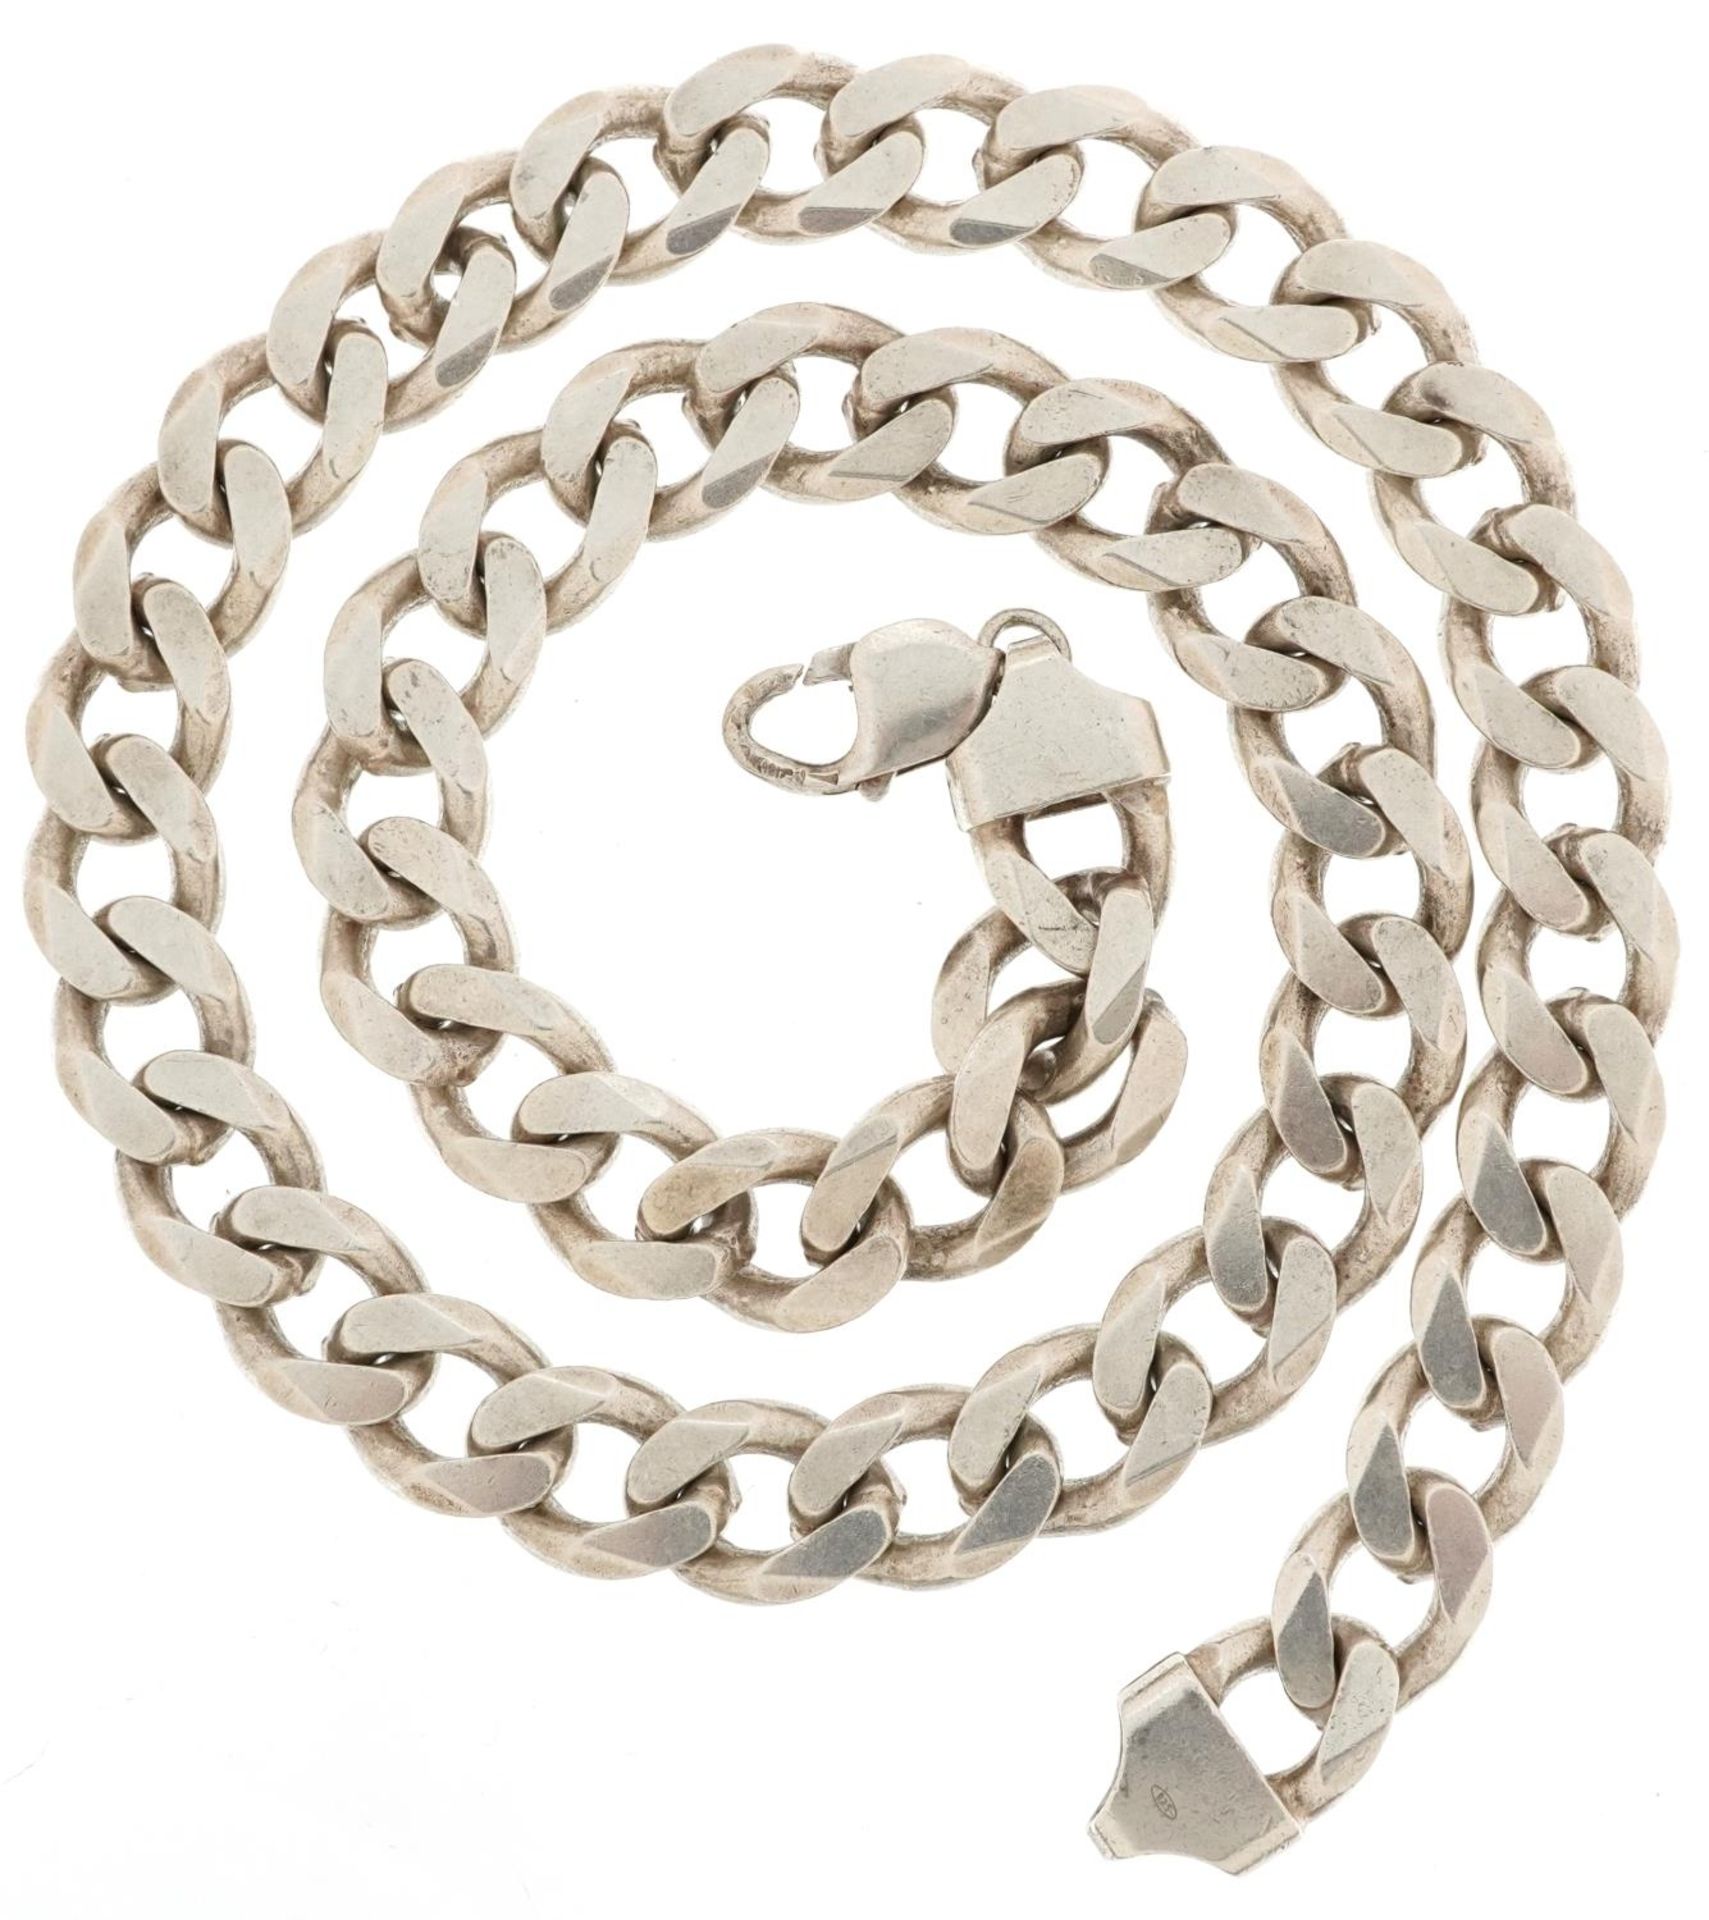 Gentlemen's heavy silver curb link necklace, 56cm in length, 162.5g - Image 2 of 3